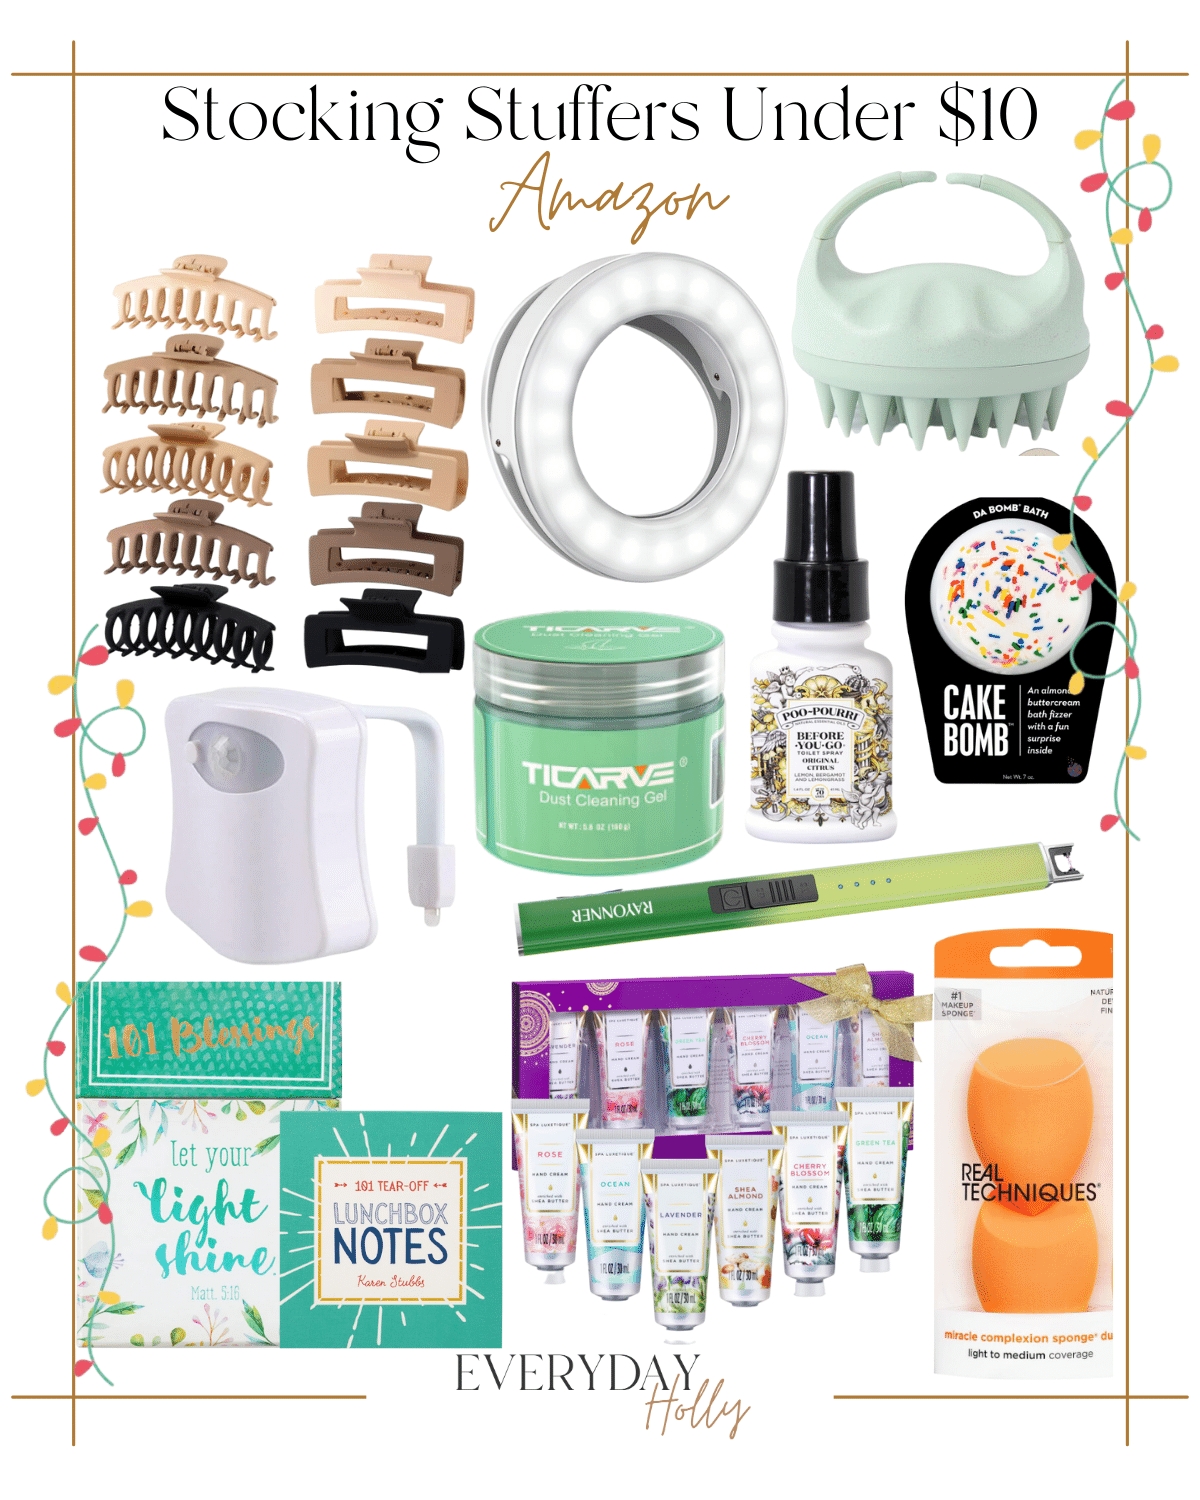 10 Holiday Gift Guides for Everyone This Season | #holiday #giftguide #giftideas #2023 #christmas #gifts #amazon #stockingstuffers #under$10 #clawclips #hairaccessories #ringlight #scalpmassager #toiletnightlight #cleaning #bathbomb #bathroomspray #lotionkit #beautyblender